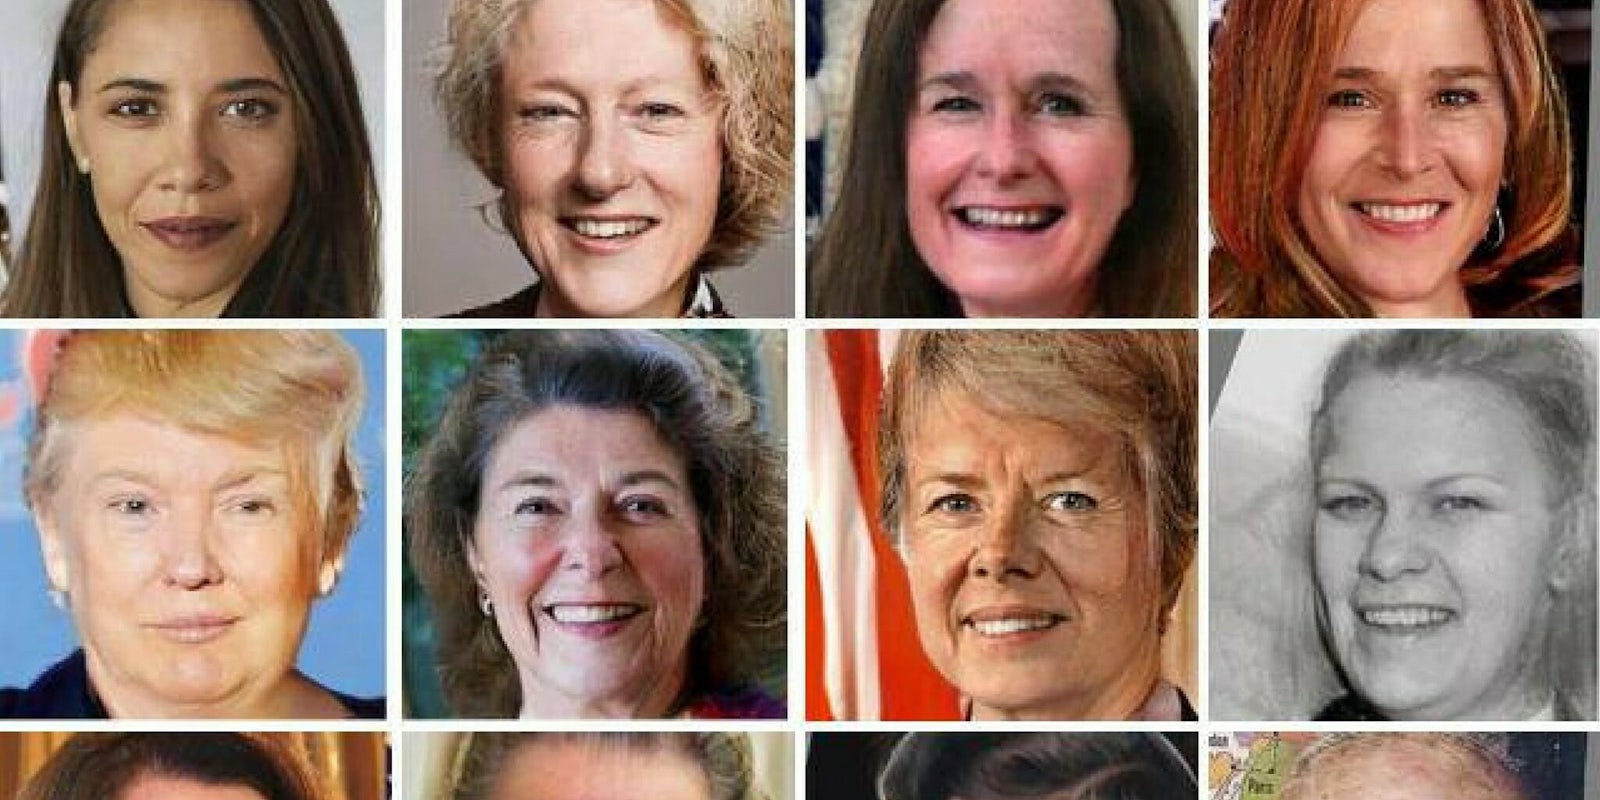 A compilation of photos of male presidents made to appeal female through an AI-based face-changing application.